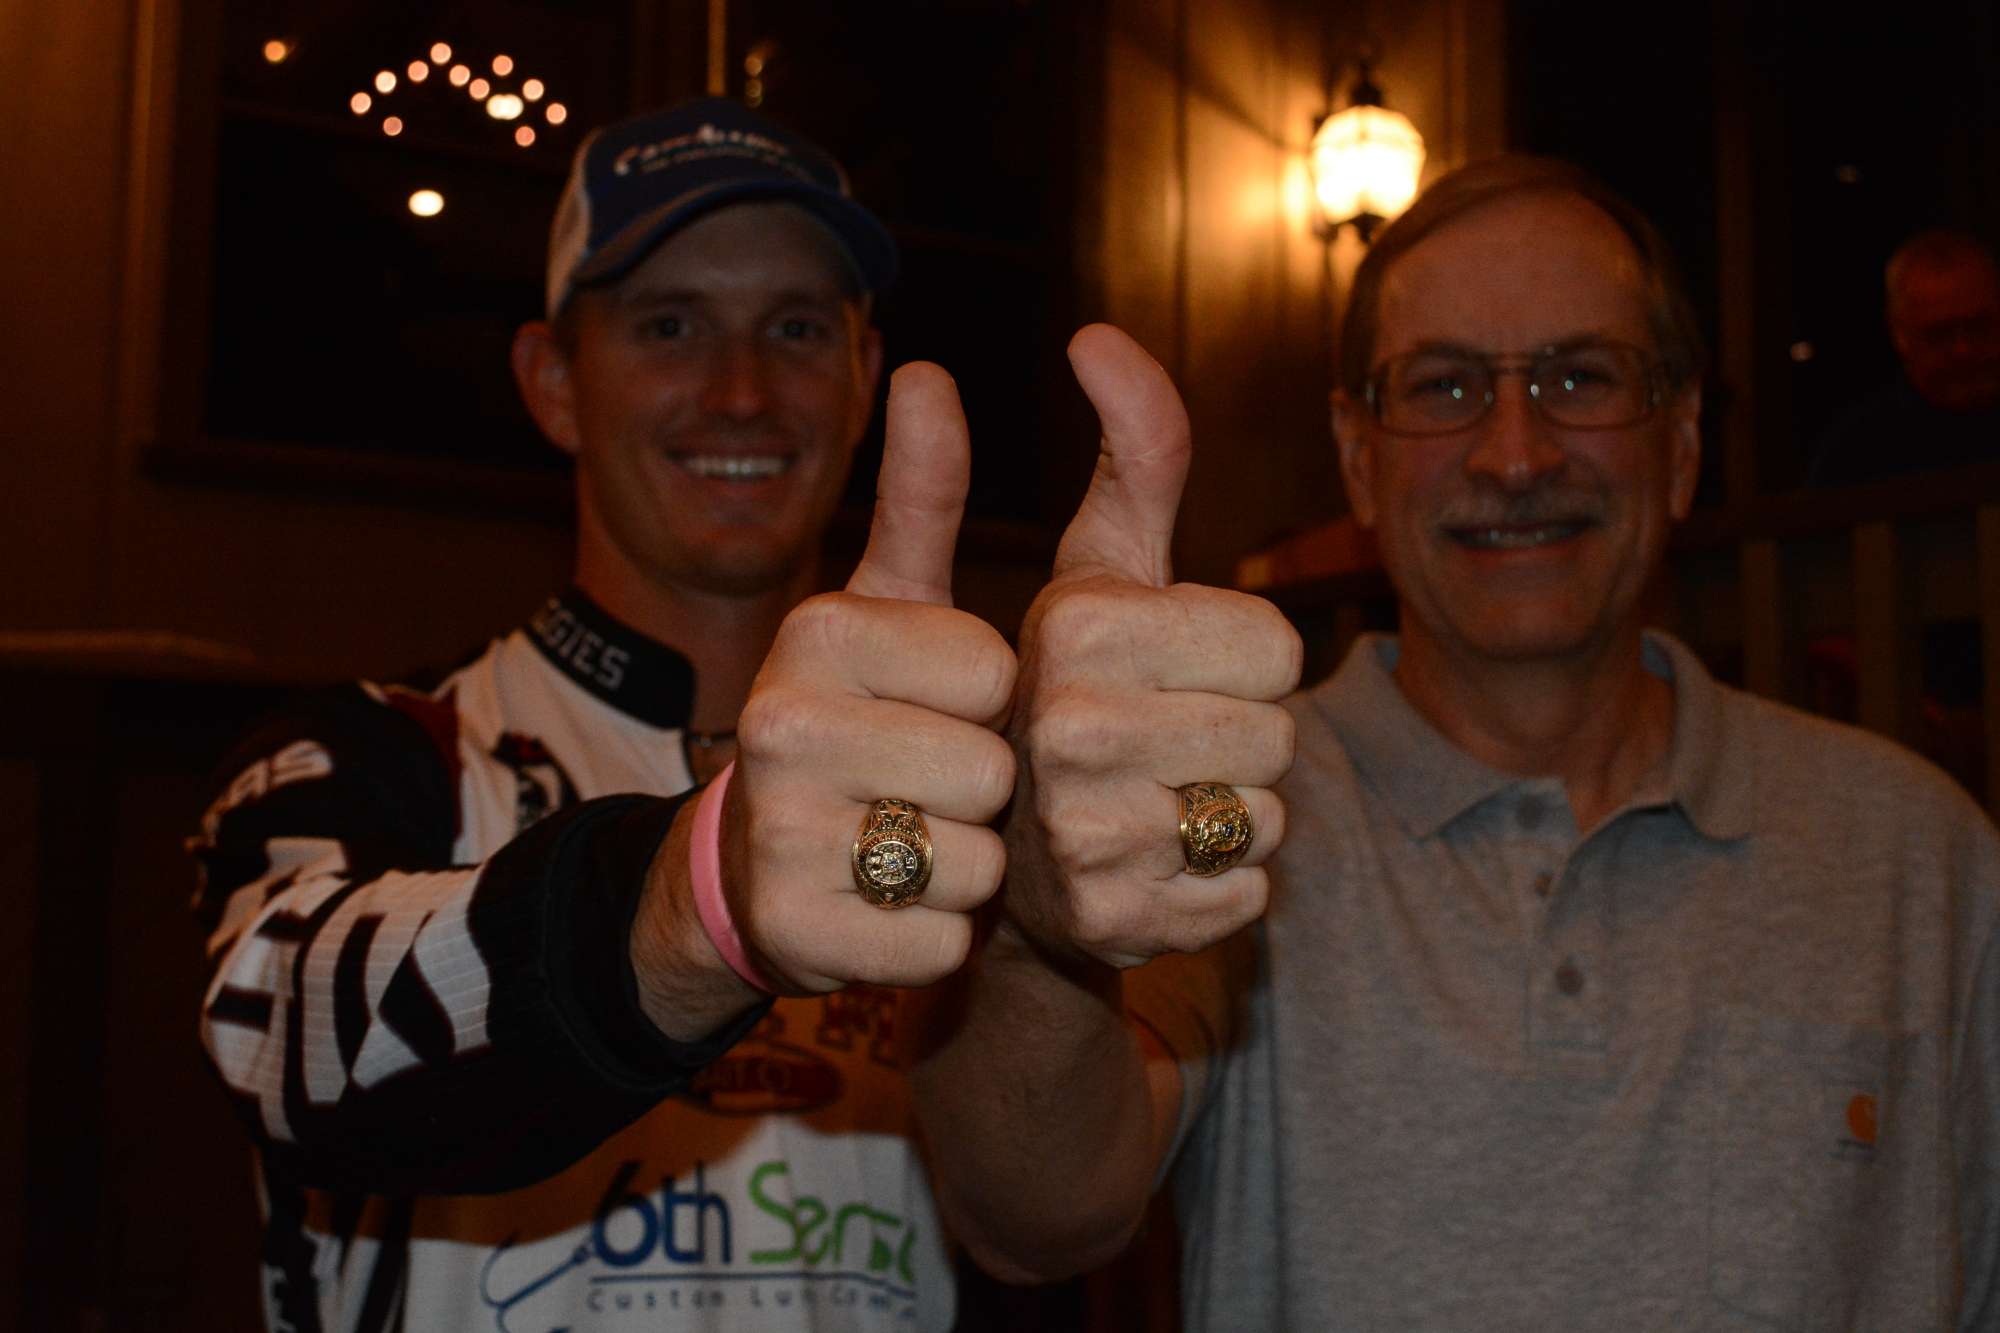 McArdle and Gilliland show off their nearly identical class rings, even though they're separated by a few decades. (Bensema will get his ring closer to his graduation date.)